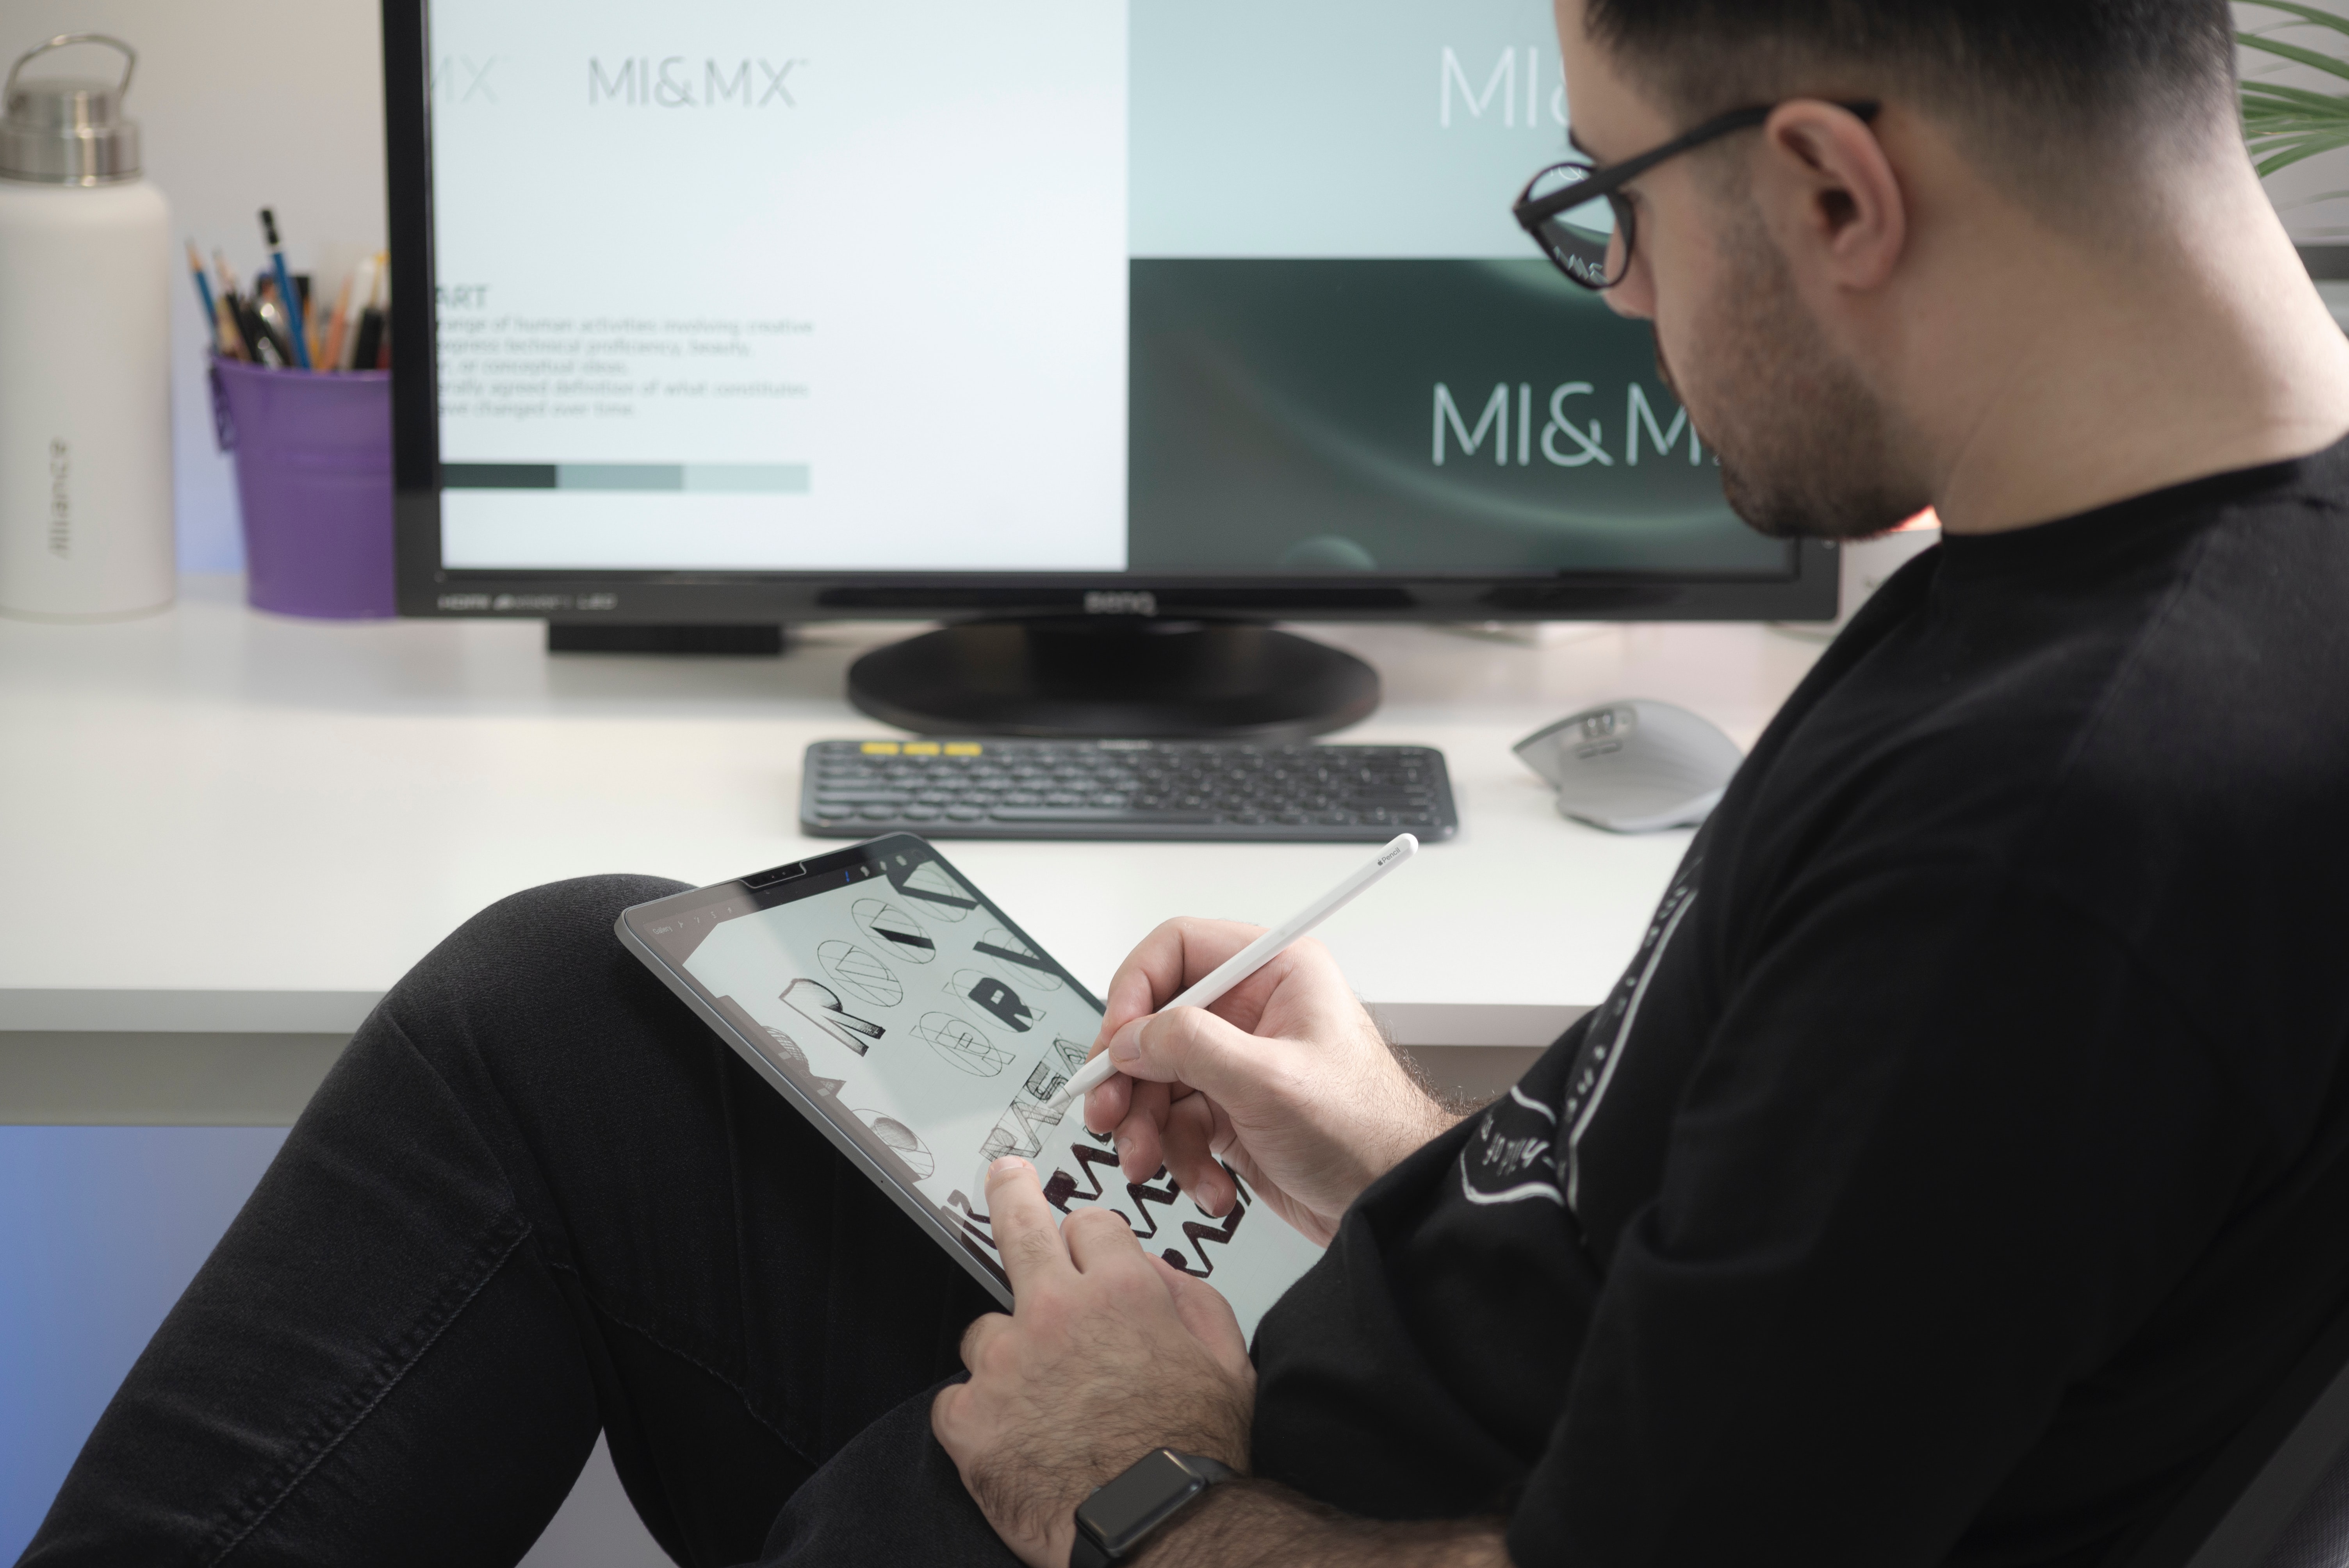 Man dressed in black drawing on a tablet with a computer screen in the background